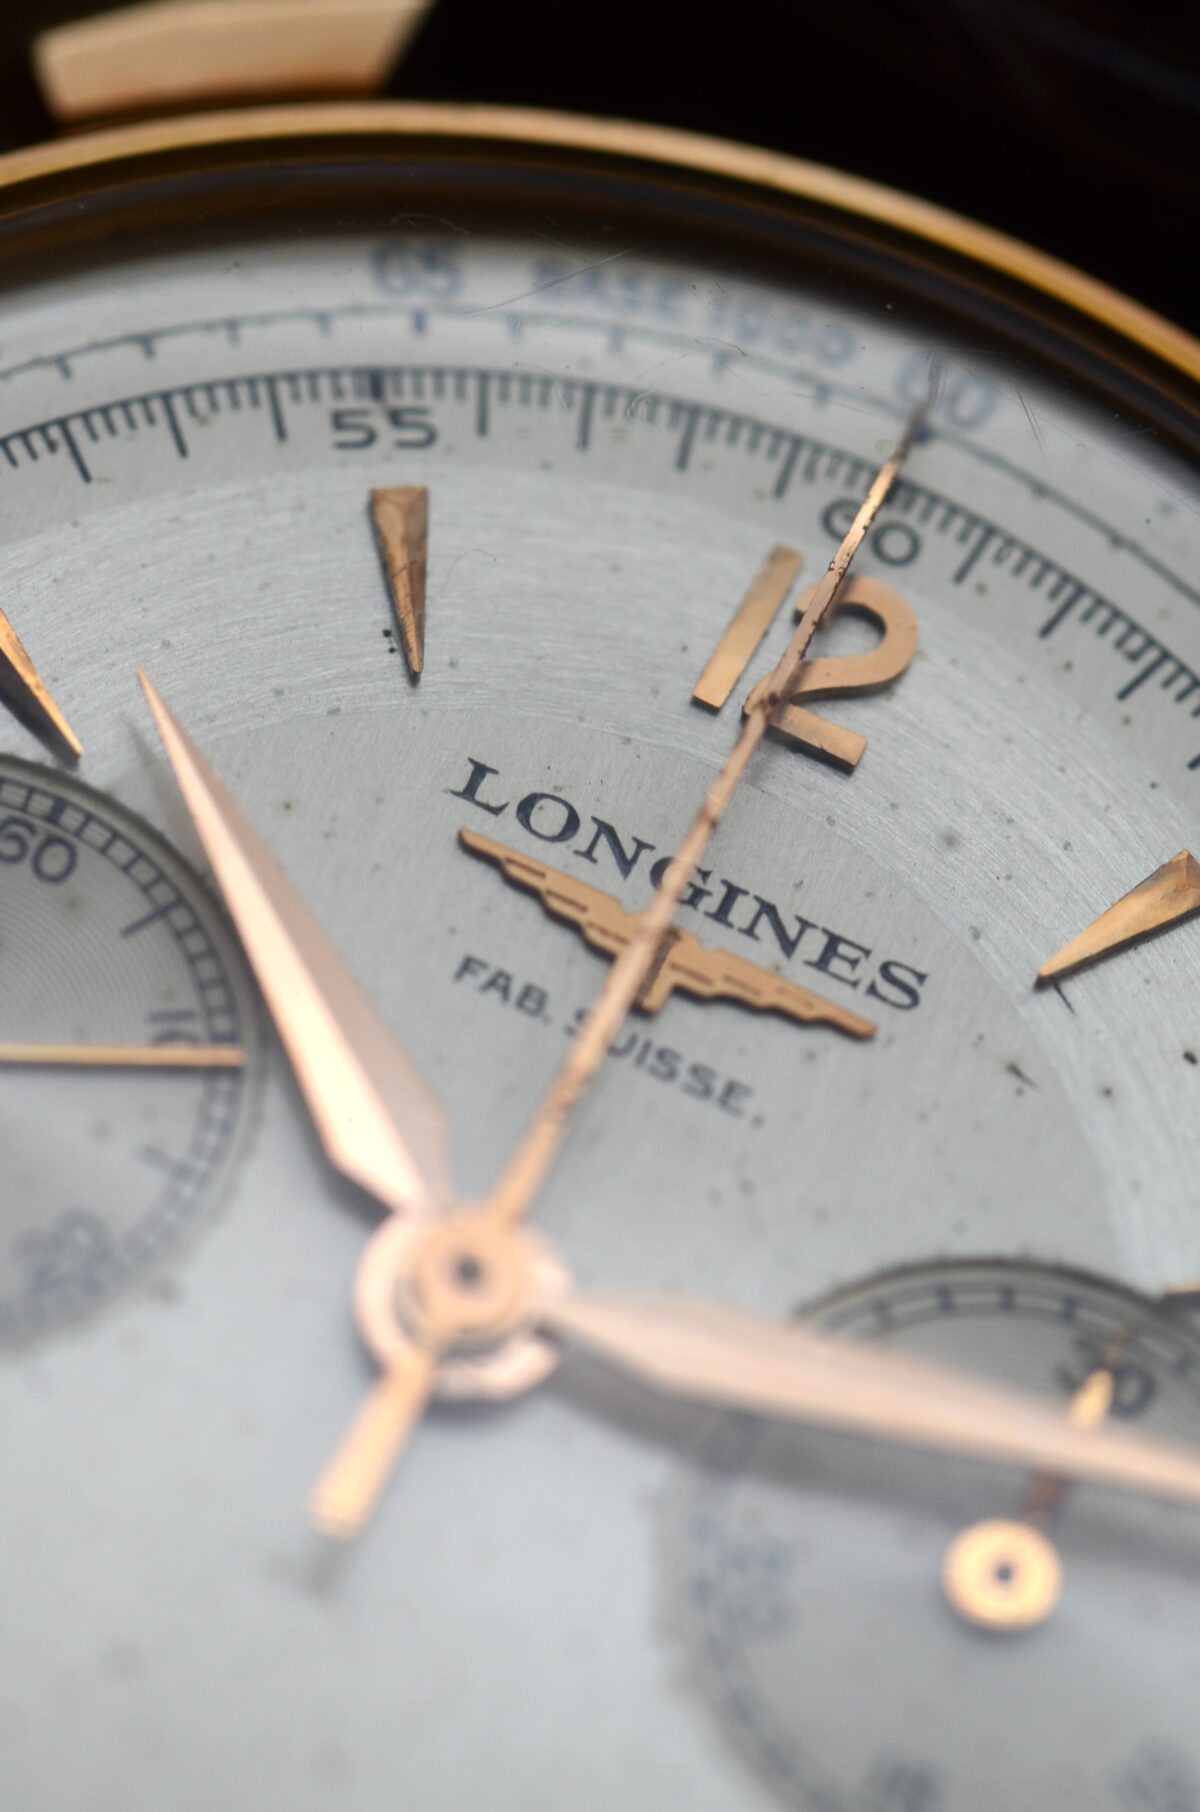 Longines Chronograph 30ch Flyback